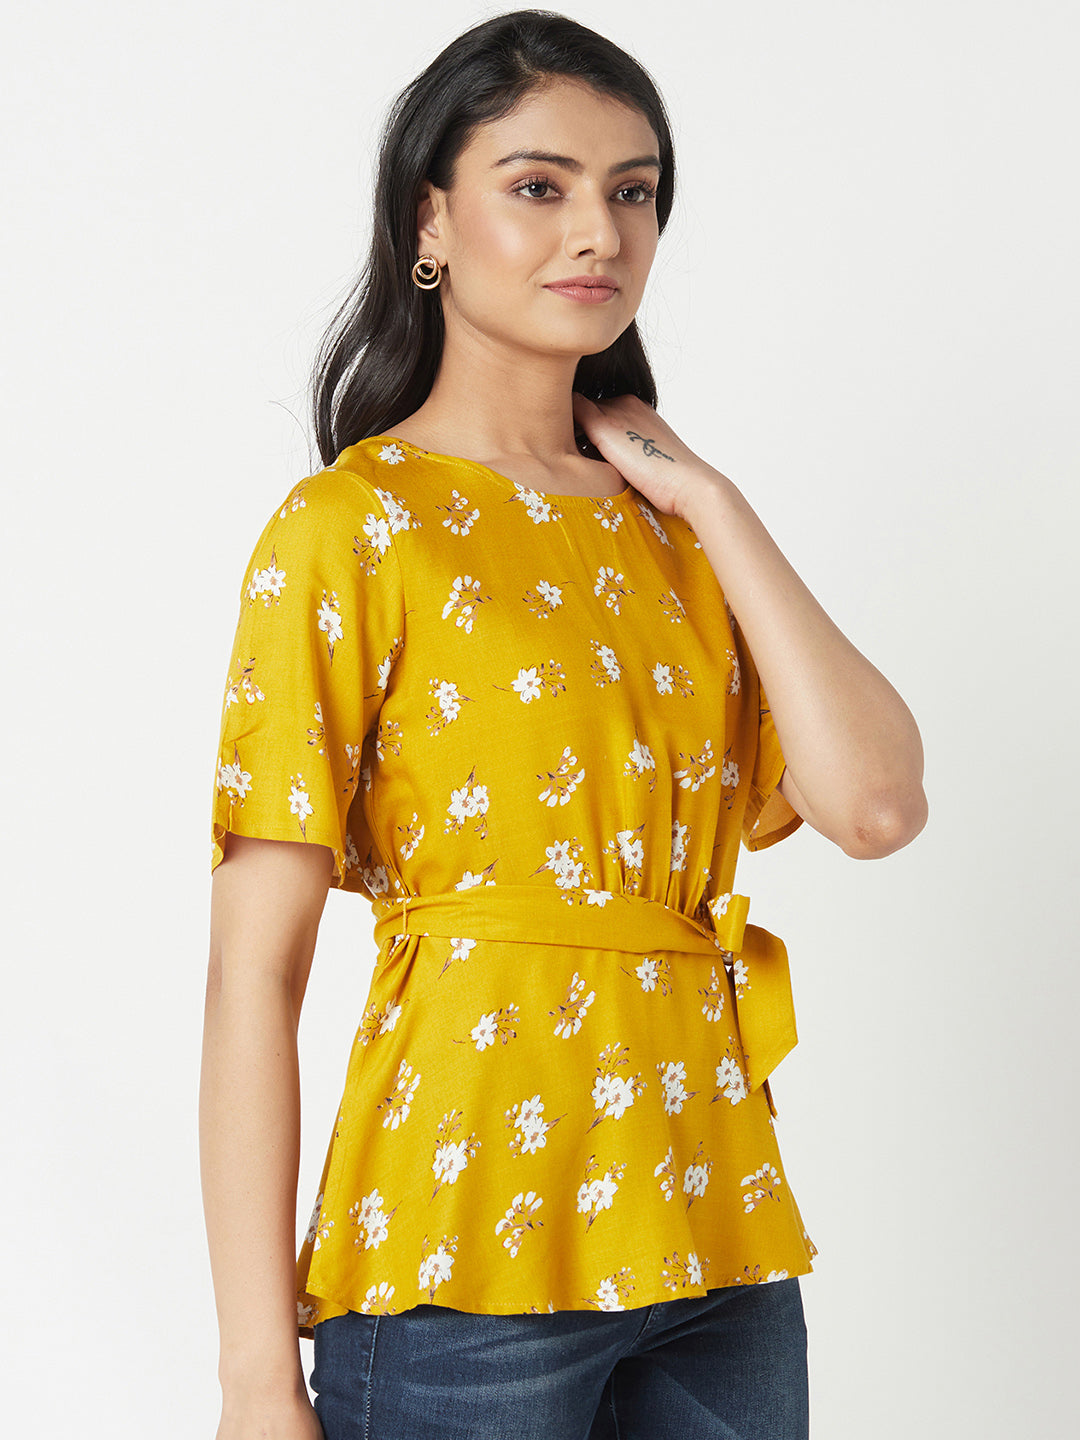 Mustard Round Neck Woven Cotton Rayon Top With Belt